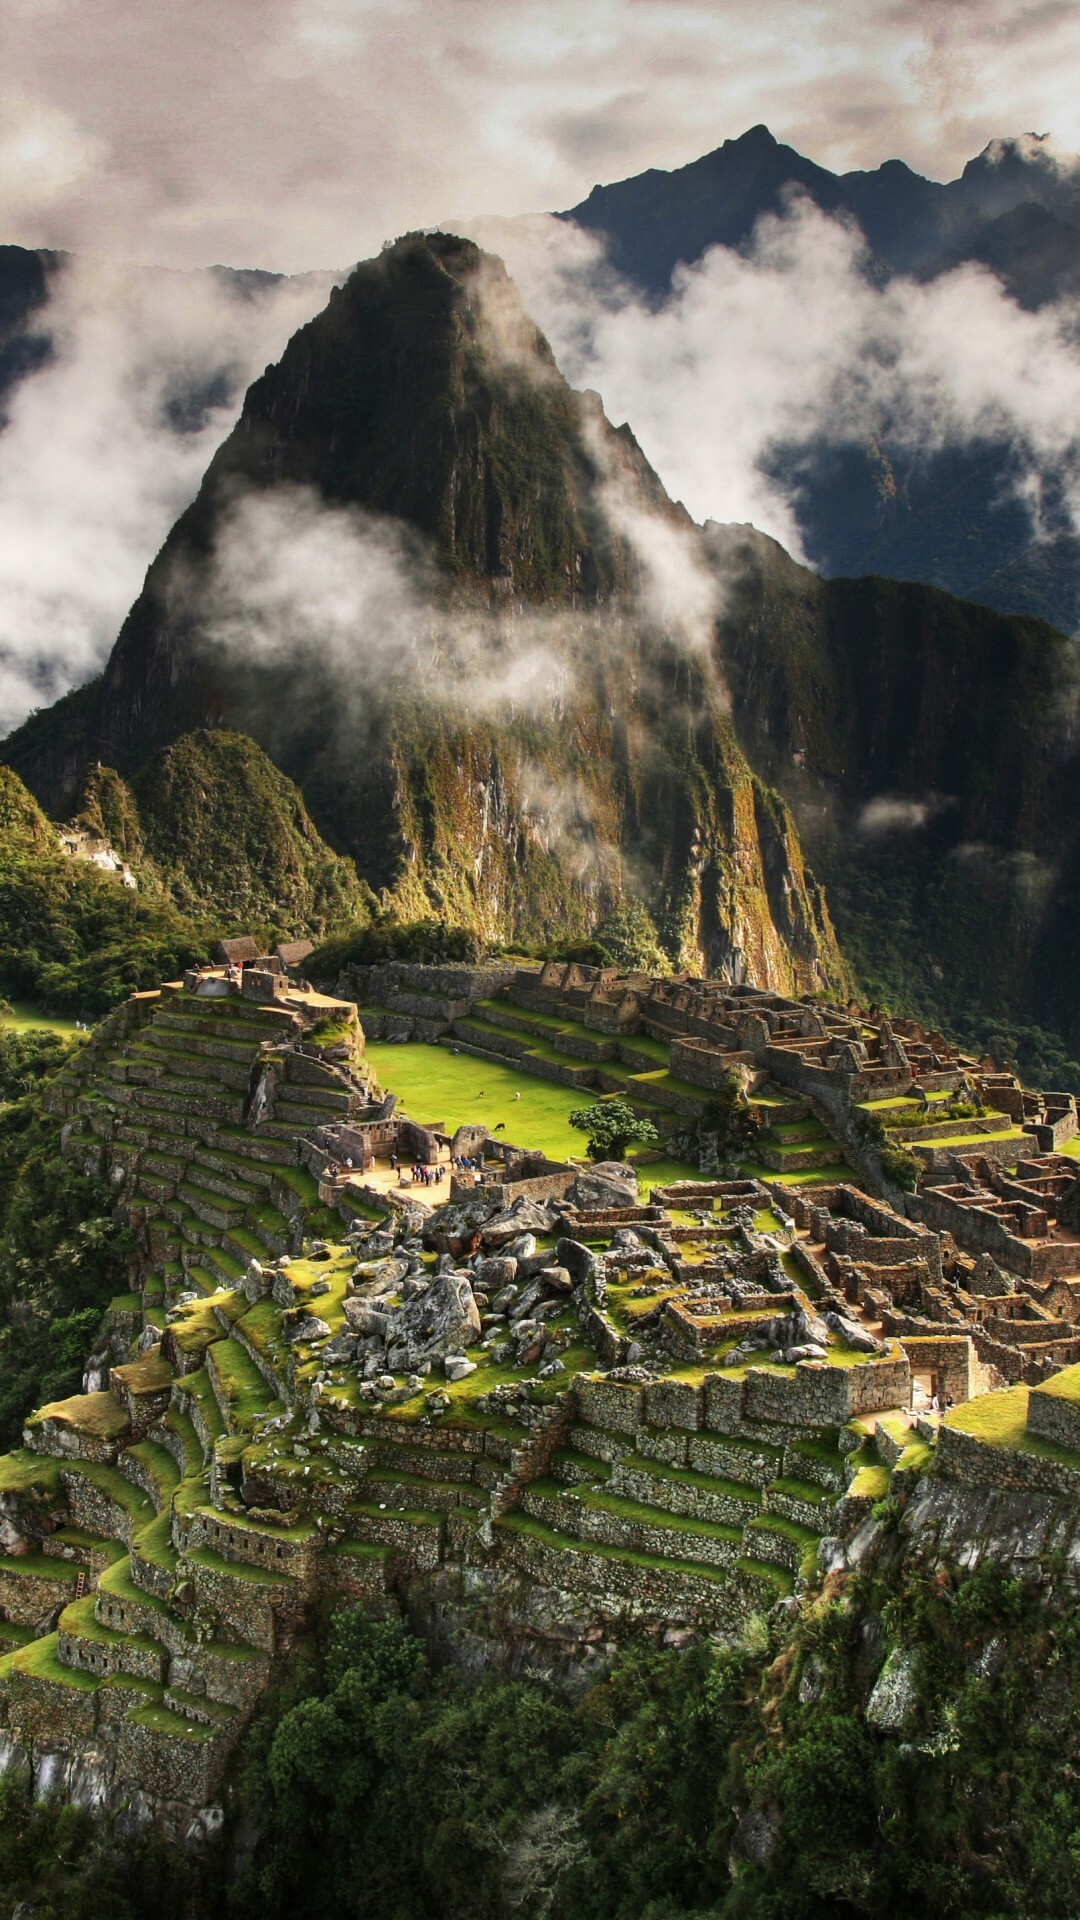 Machu Picchu: Tucked away in the rocky countryside northwest of Cuzco, Inca citadel. 1080x1920 Full HD Wallpaper.